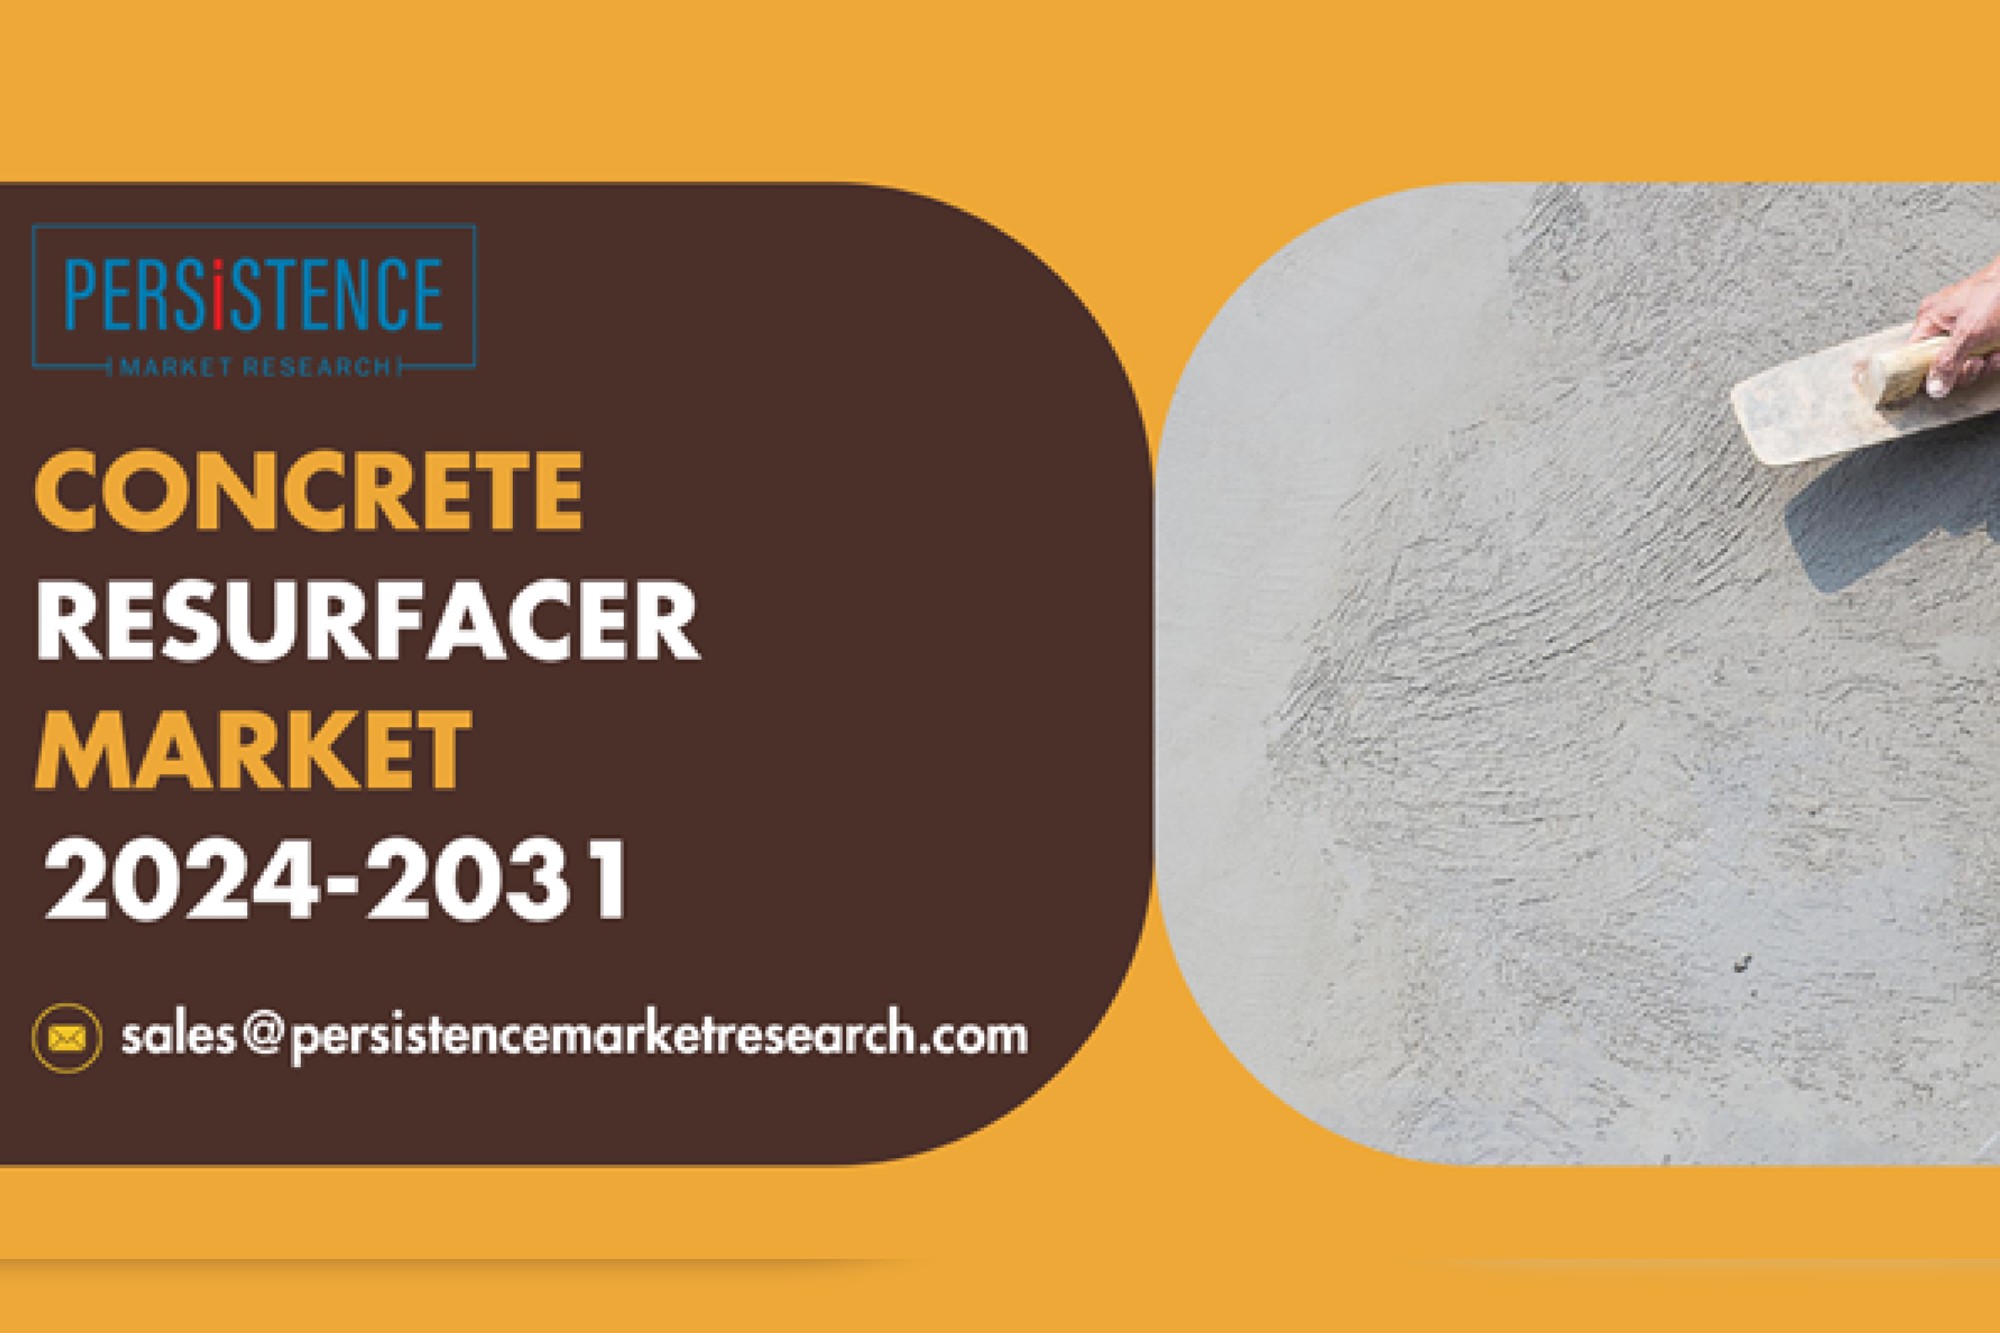 The concrete resurfacer market plays a vital role in construction and renovation, offering solutions for rejuvenating concrete surfaces without extensive demolition. With a projected compound annual growth rate (CAGR) of 5.7 percent, this market is anticipated to reach $2.1 billion by 2031, up from $1.4 billion in 2024 according to Persistence Market Research.